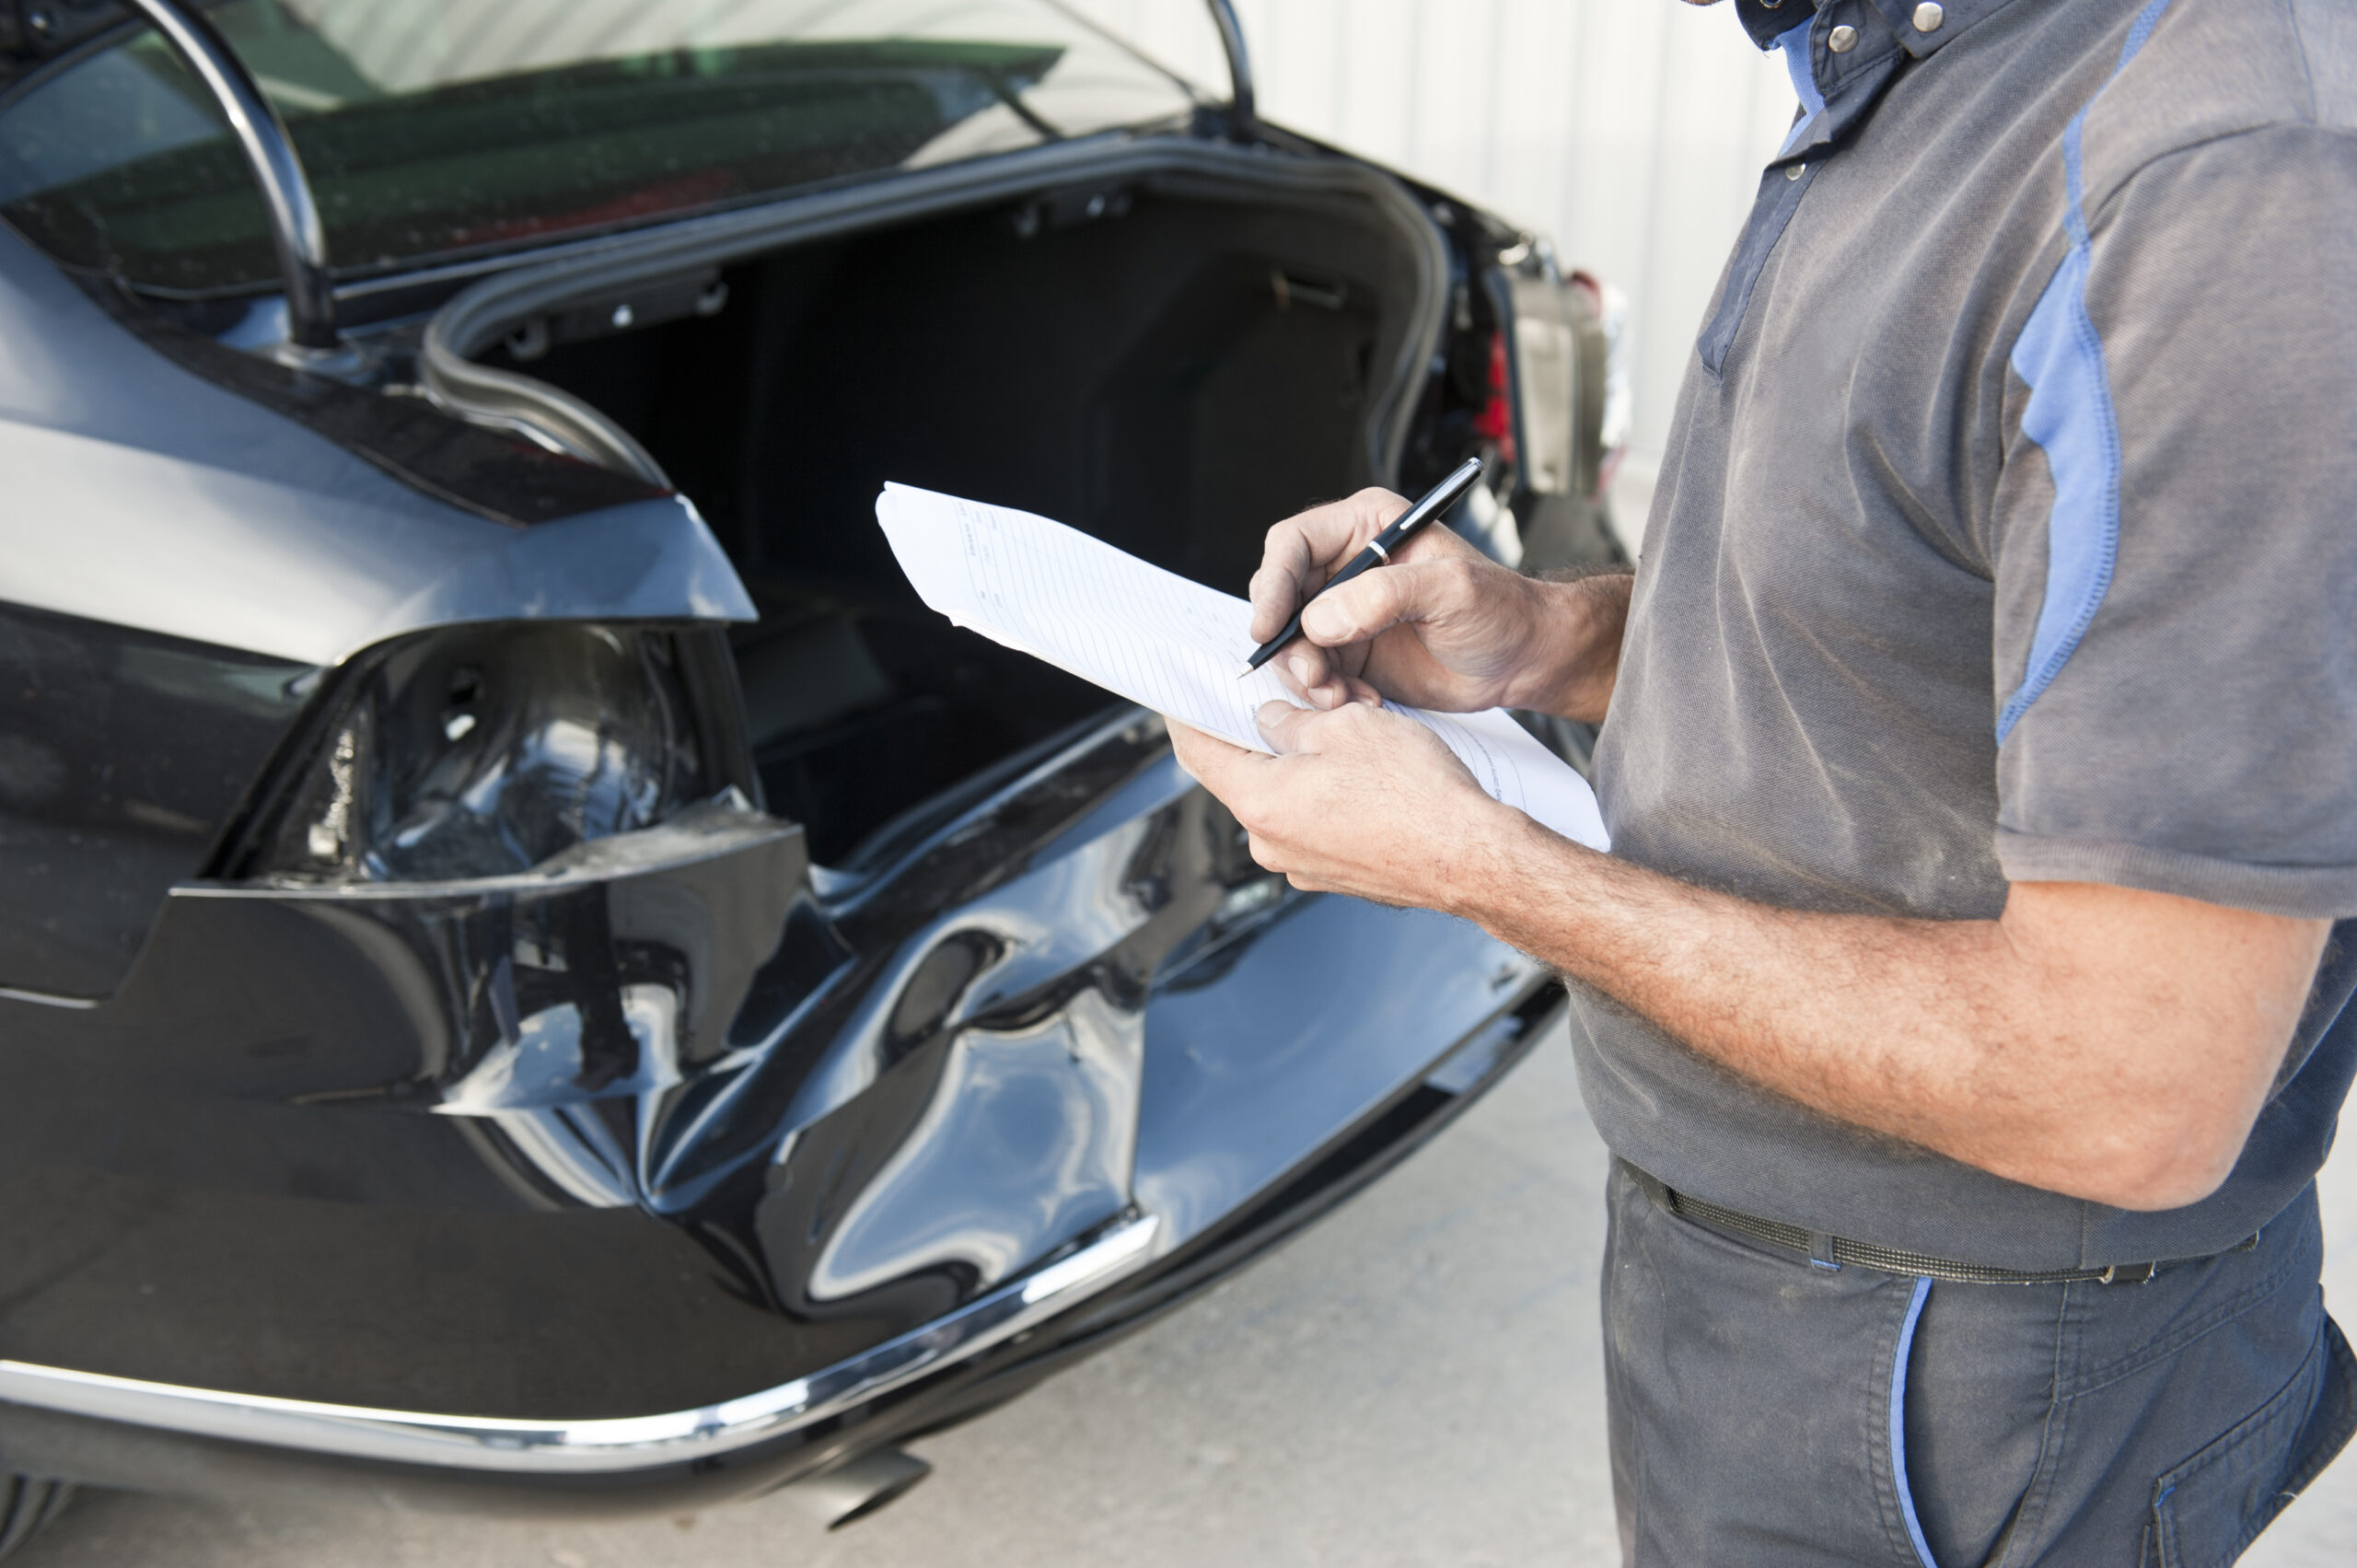 Texas lawmaker contends Safe Auto Repair Bill would mandate carriers uphold policy contracts